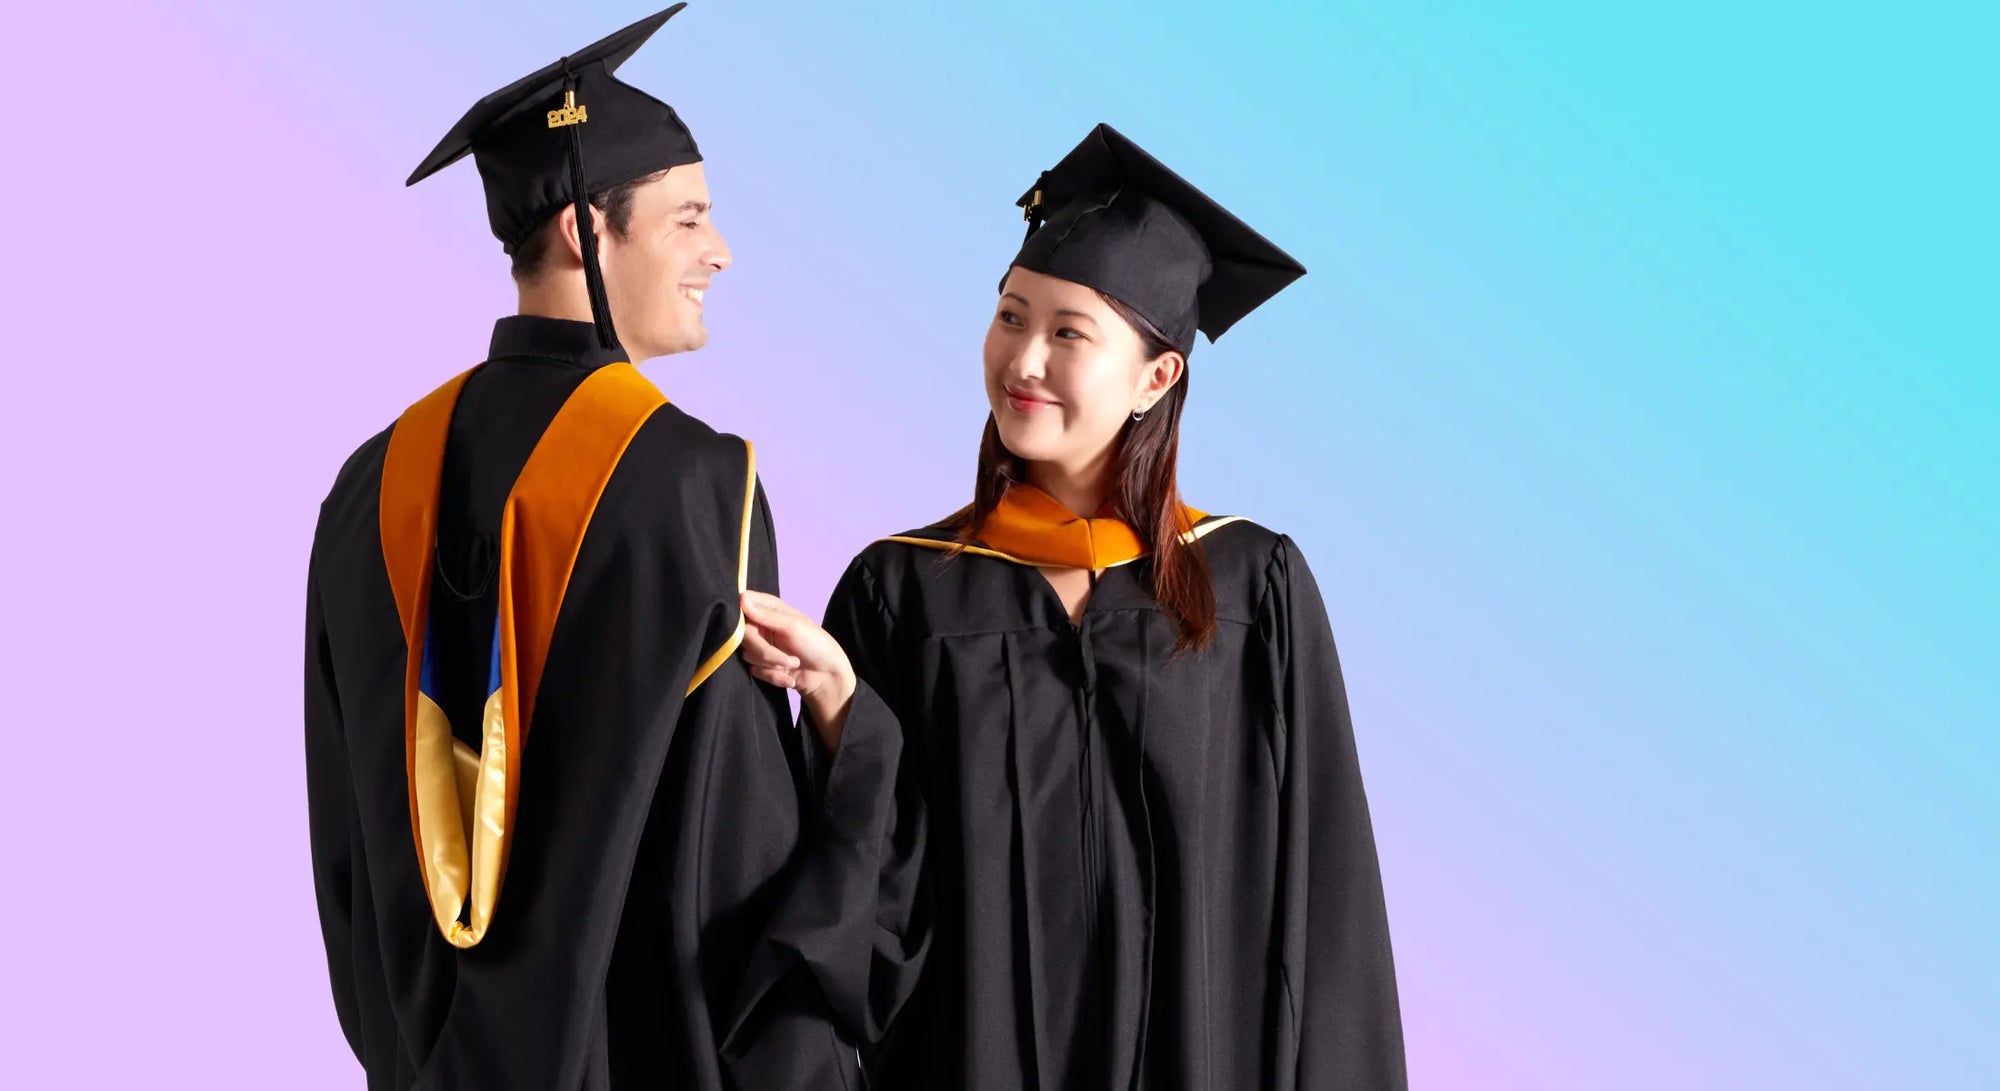 Male and female Master's graduates wearing gowns and caps celebrate.